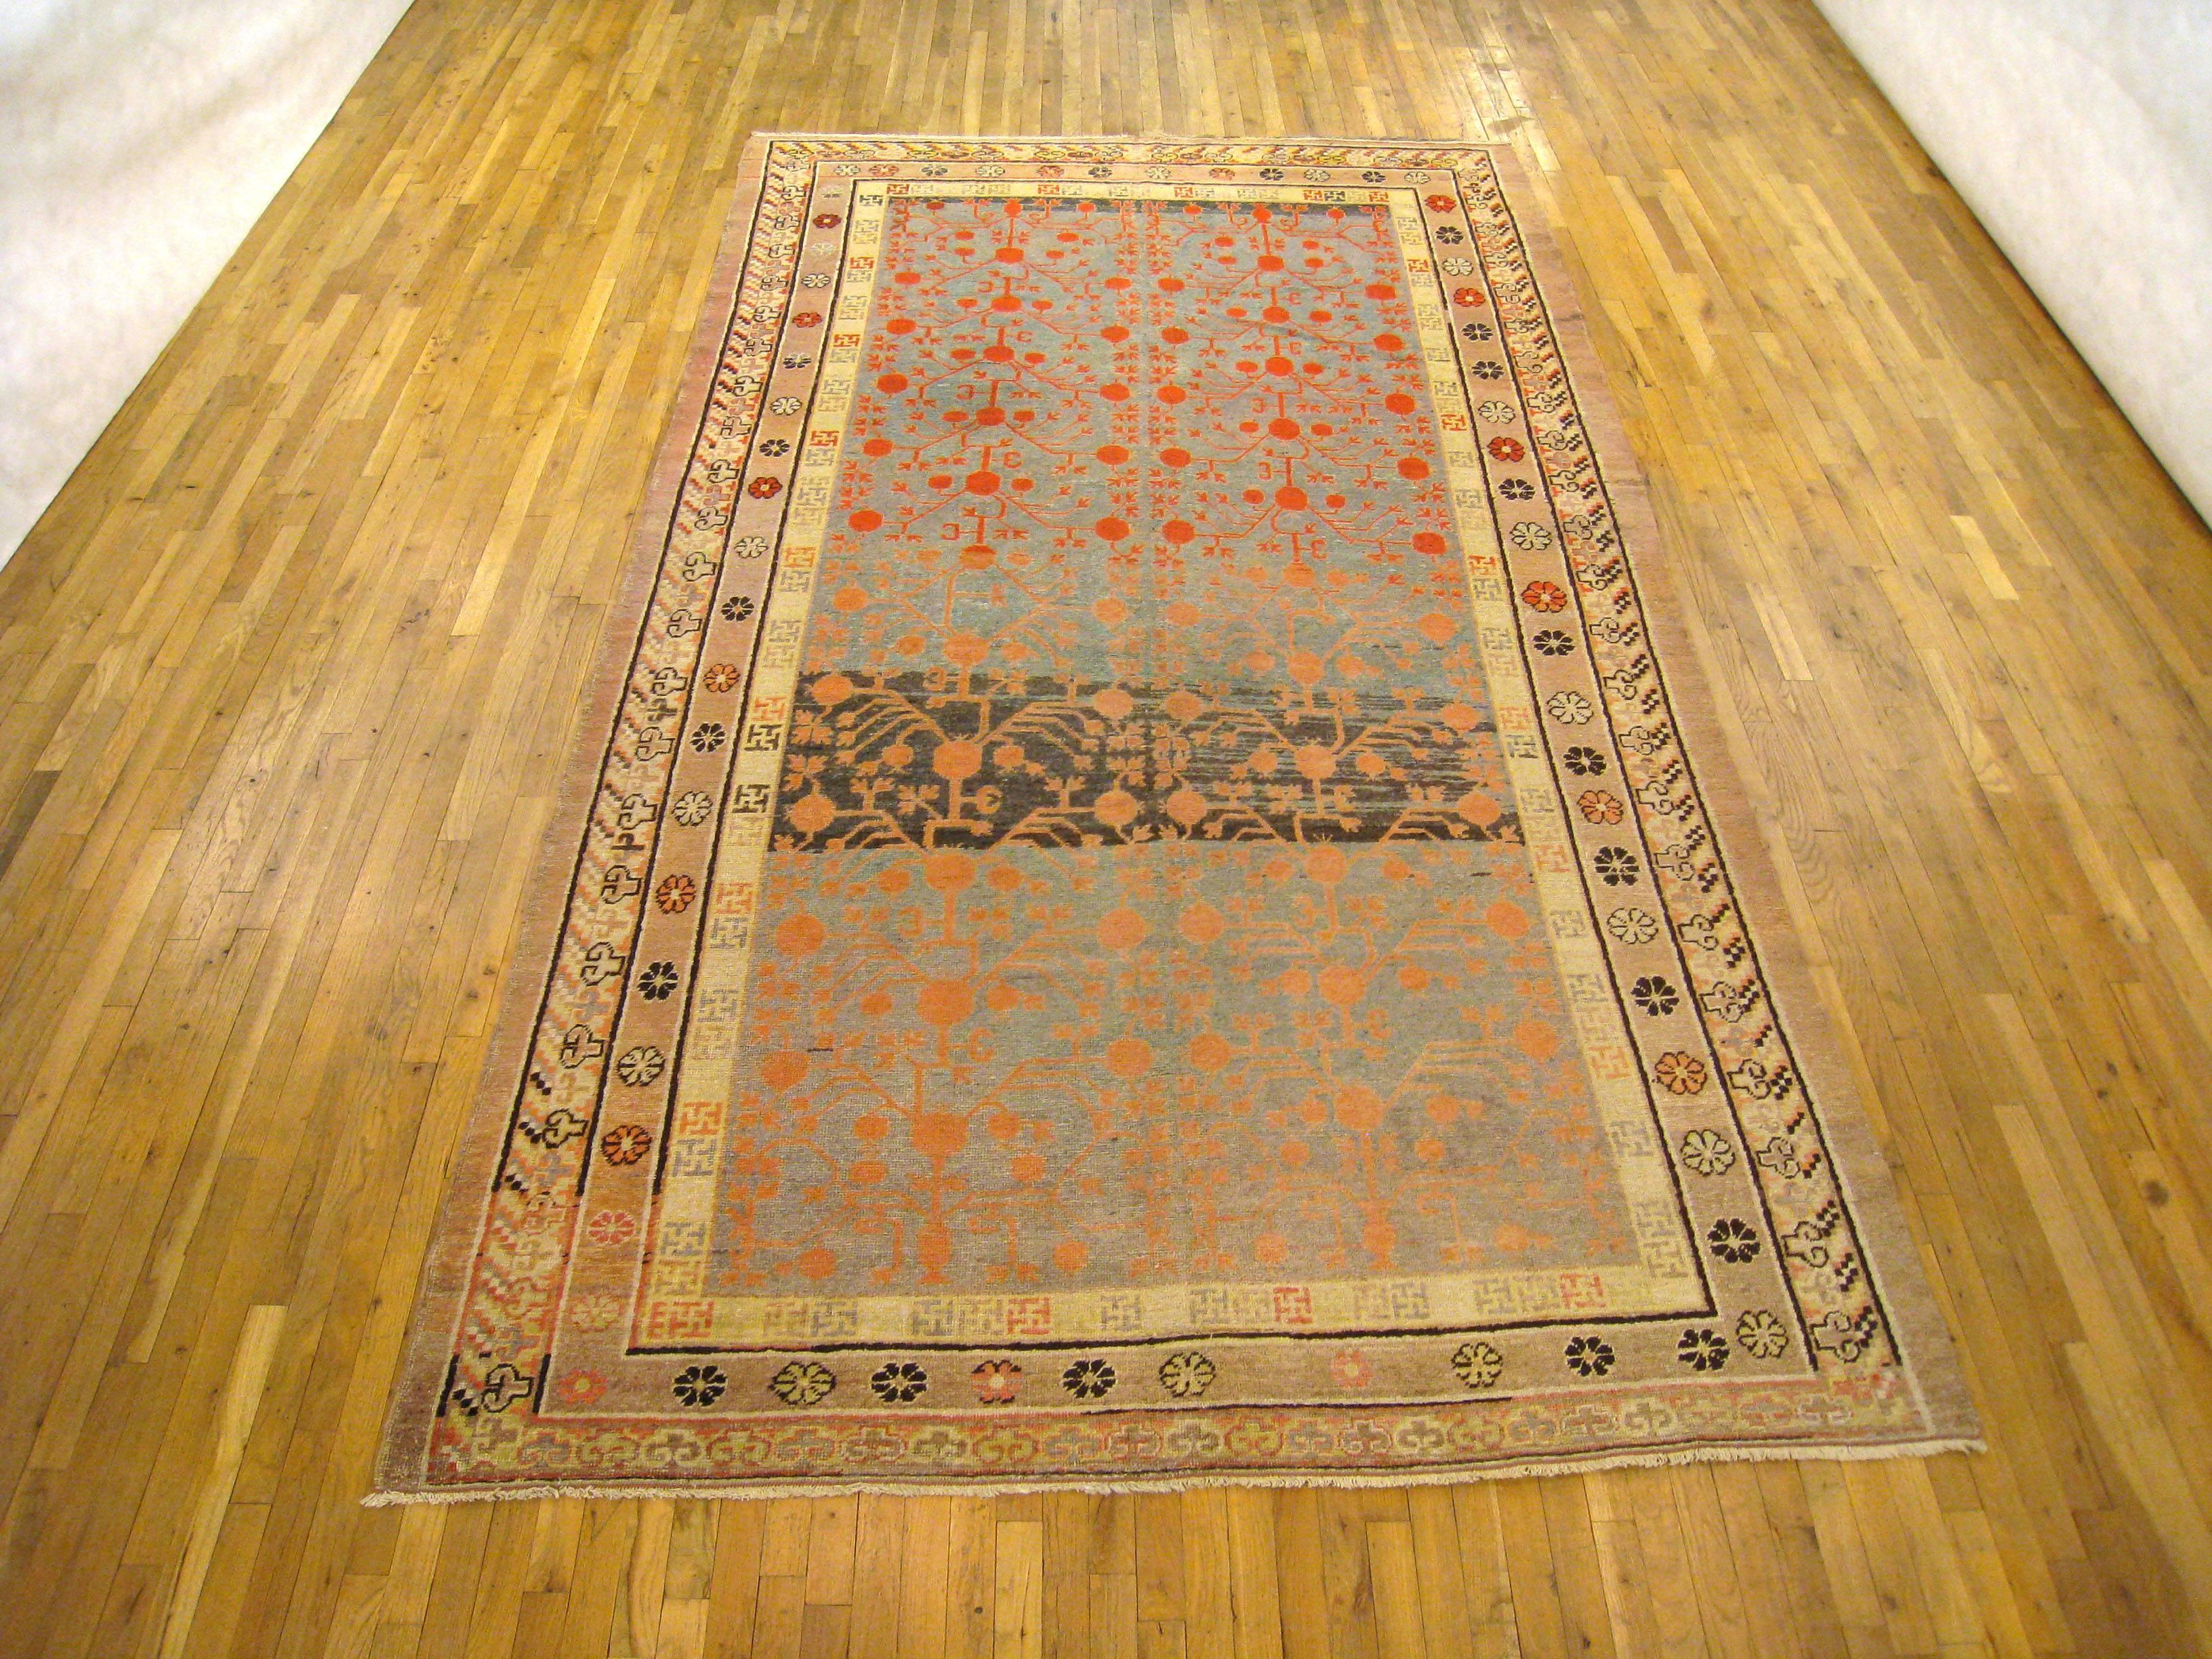 An antique Khotan oriental carpet, size 12'8 x 6'10, circa 1890. This handsome antique decorative rug features a stylized repeating design on a light blue background, with different shades of light blue from one end to another. This color variation,